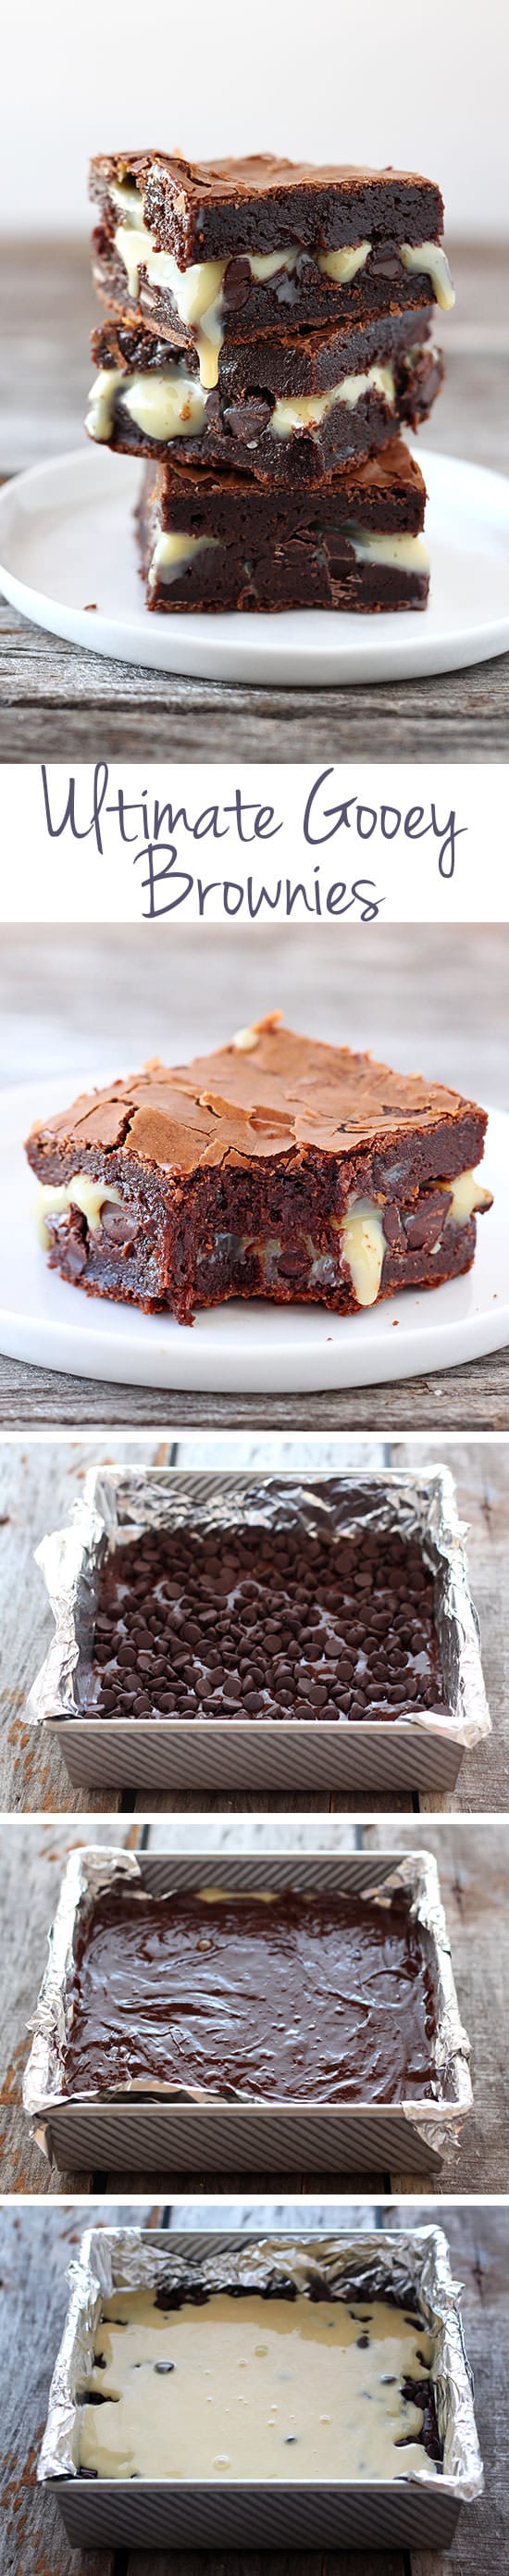 Ultimate Gooey Brownies - ridiculously amazing!